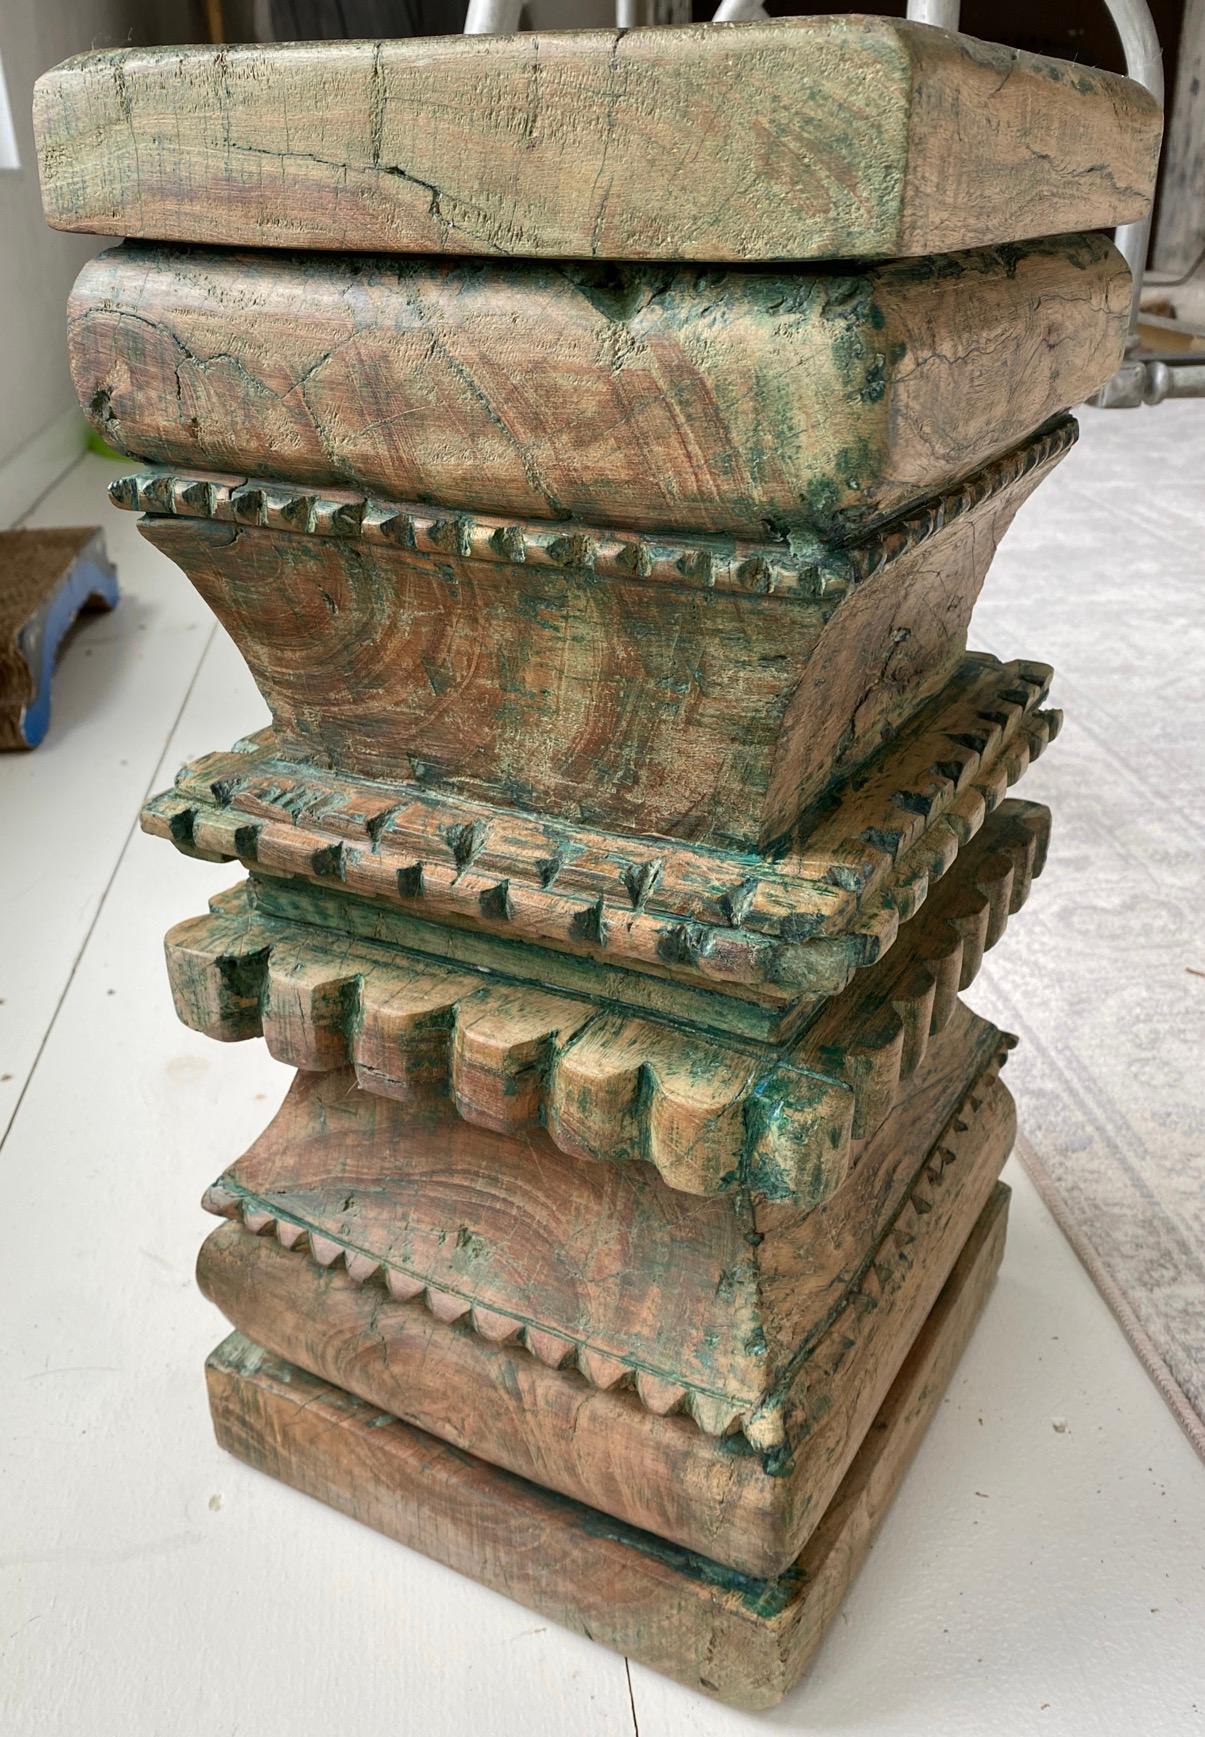 Indian carved wood pedestal, plinth, table bases or stools. Beautifully hand carved with wonderful wood patina showing paint remnant giving them wonderful interest and character. Once part of a column, reduced to a size usable as end tables,